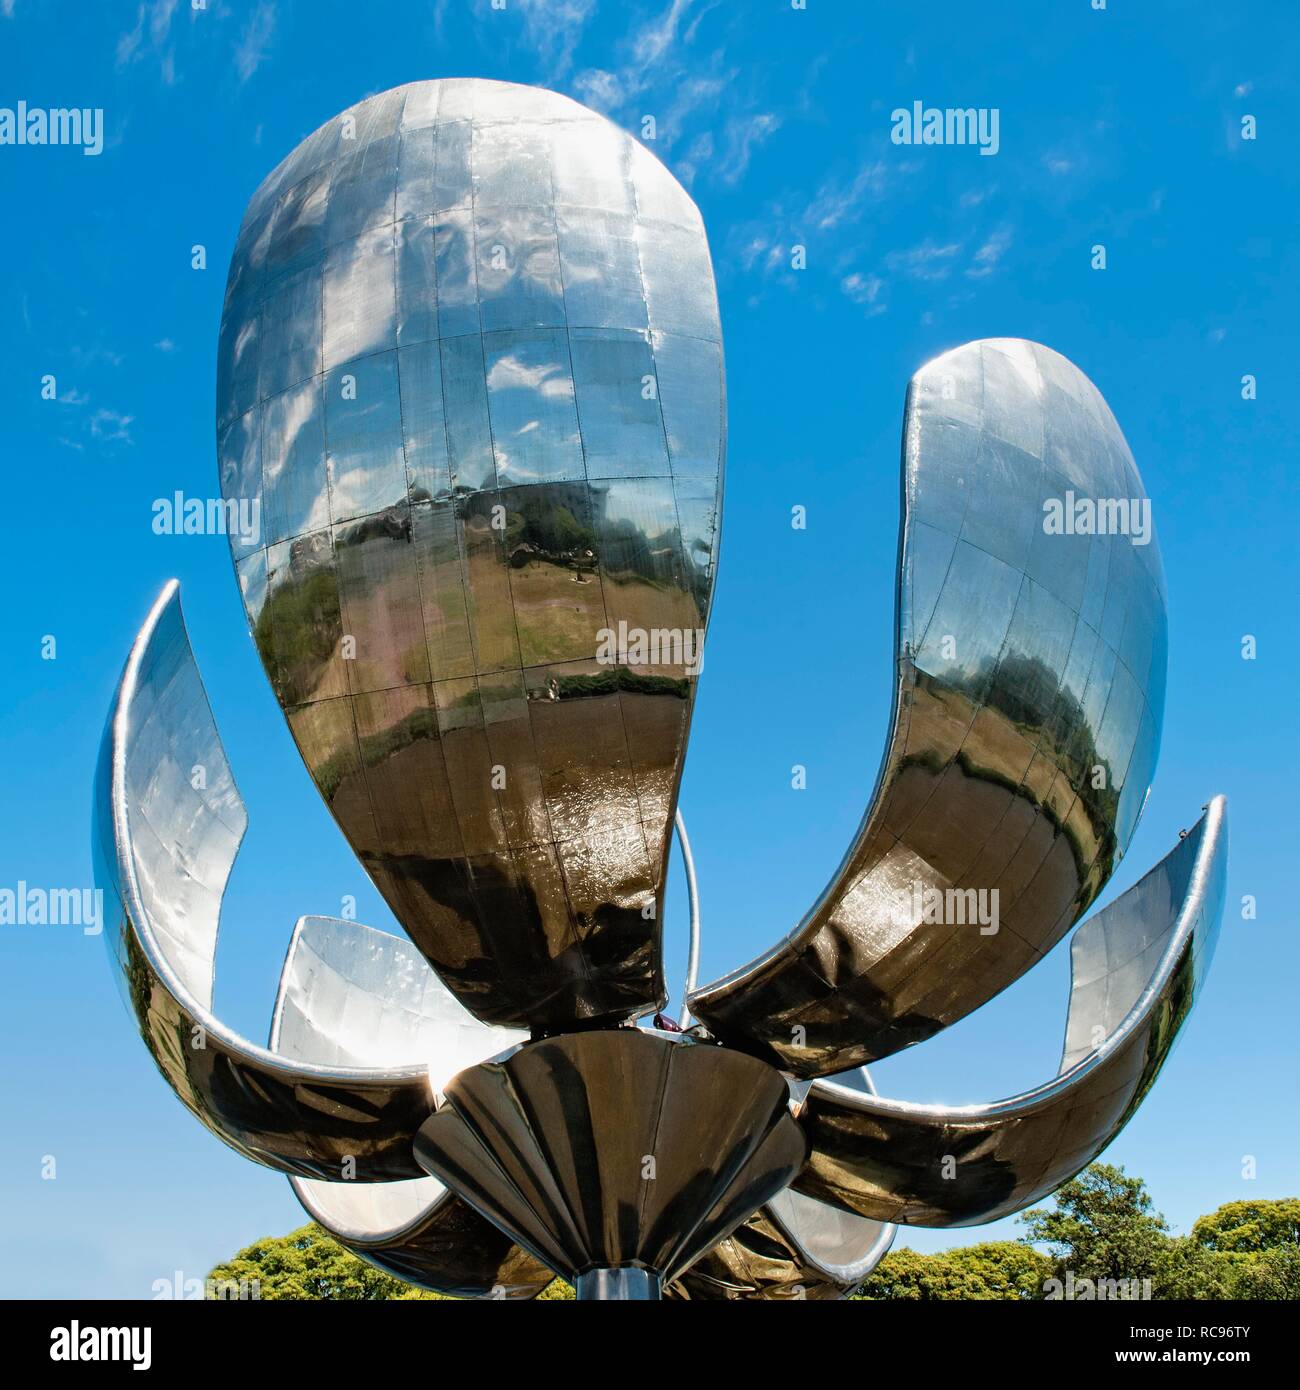 Floralis Generica, metallic sculpture representing a flower, United Nations Plaza, Buenos Aires, Argentina, South America Stock Photo